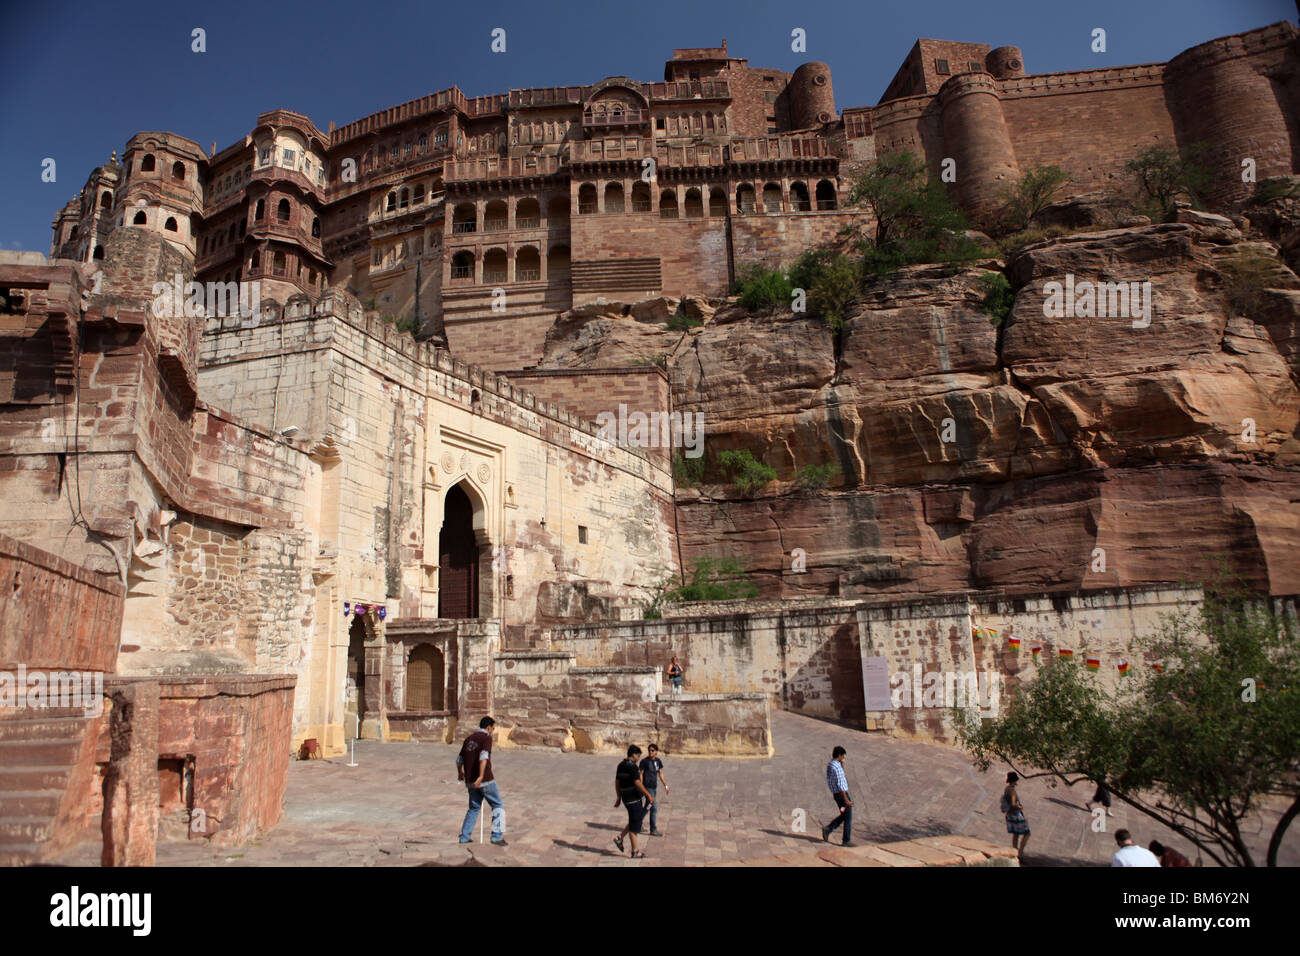 Wide view iew of the Mehrangarh Fort in Jodhpur, Rajasthan in India. Stock Photo